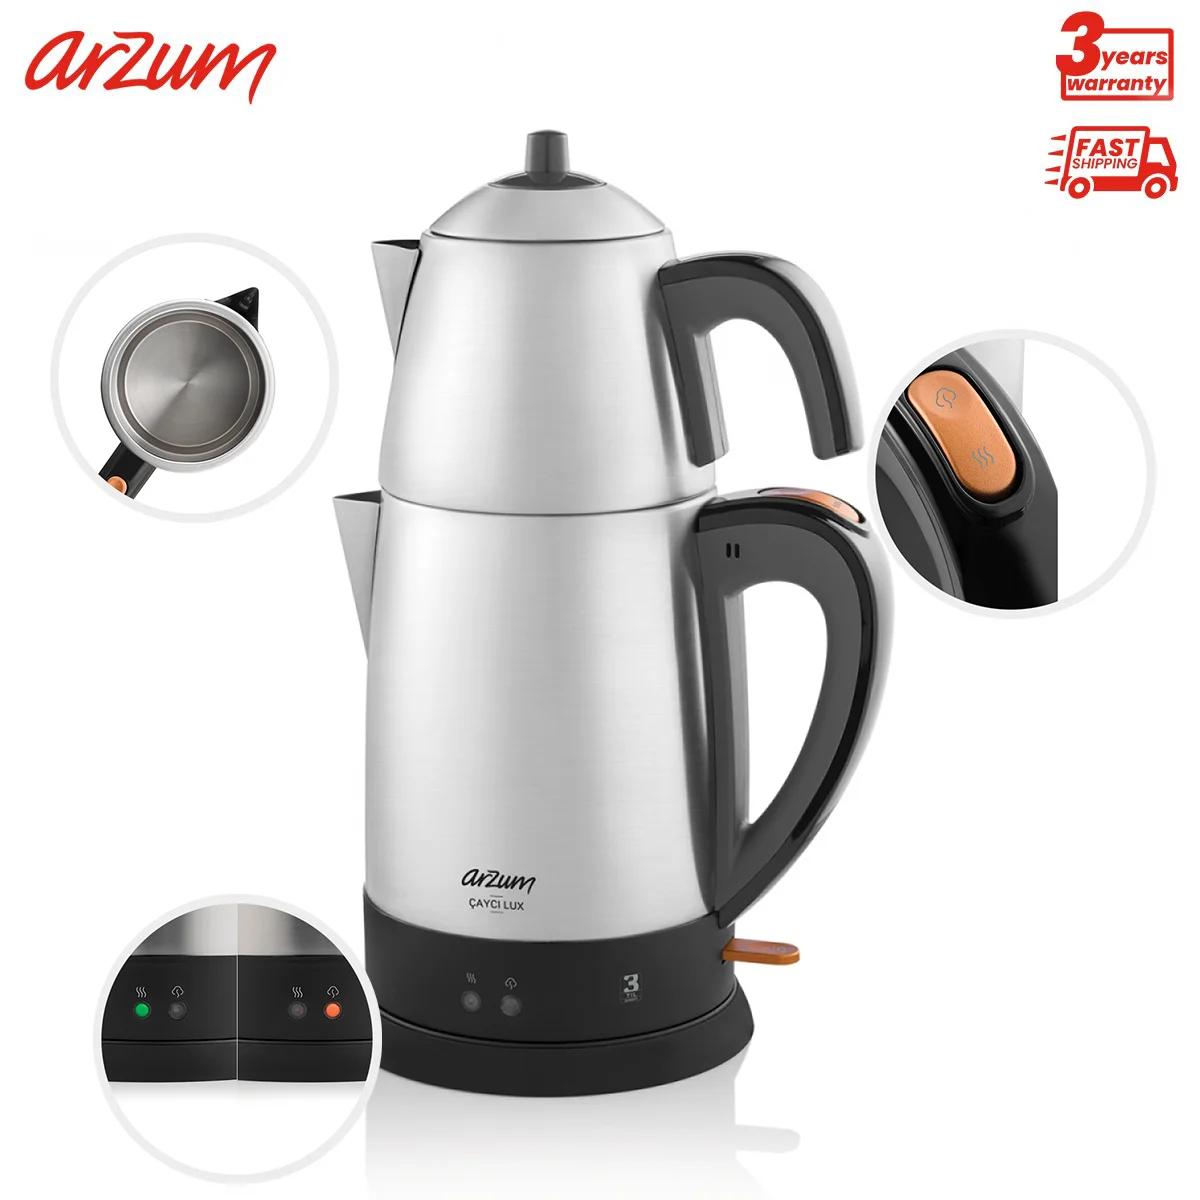 

Arzum Cayci Klasik Tea Machine, 1650W power, removable stainless steel tea filter, boil-dry protection, 360° rotating base